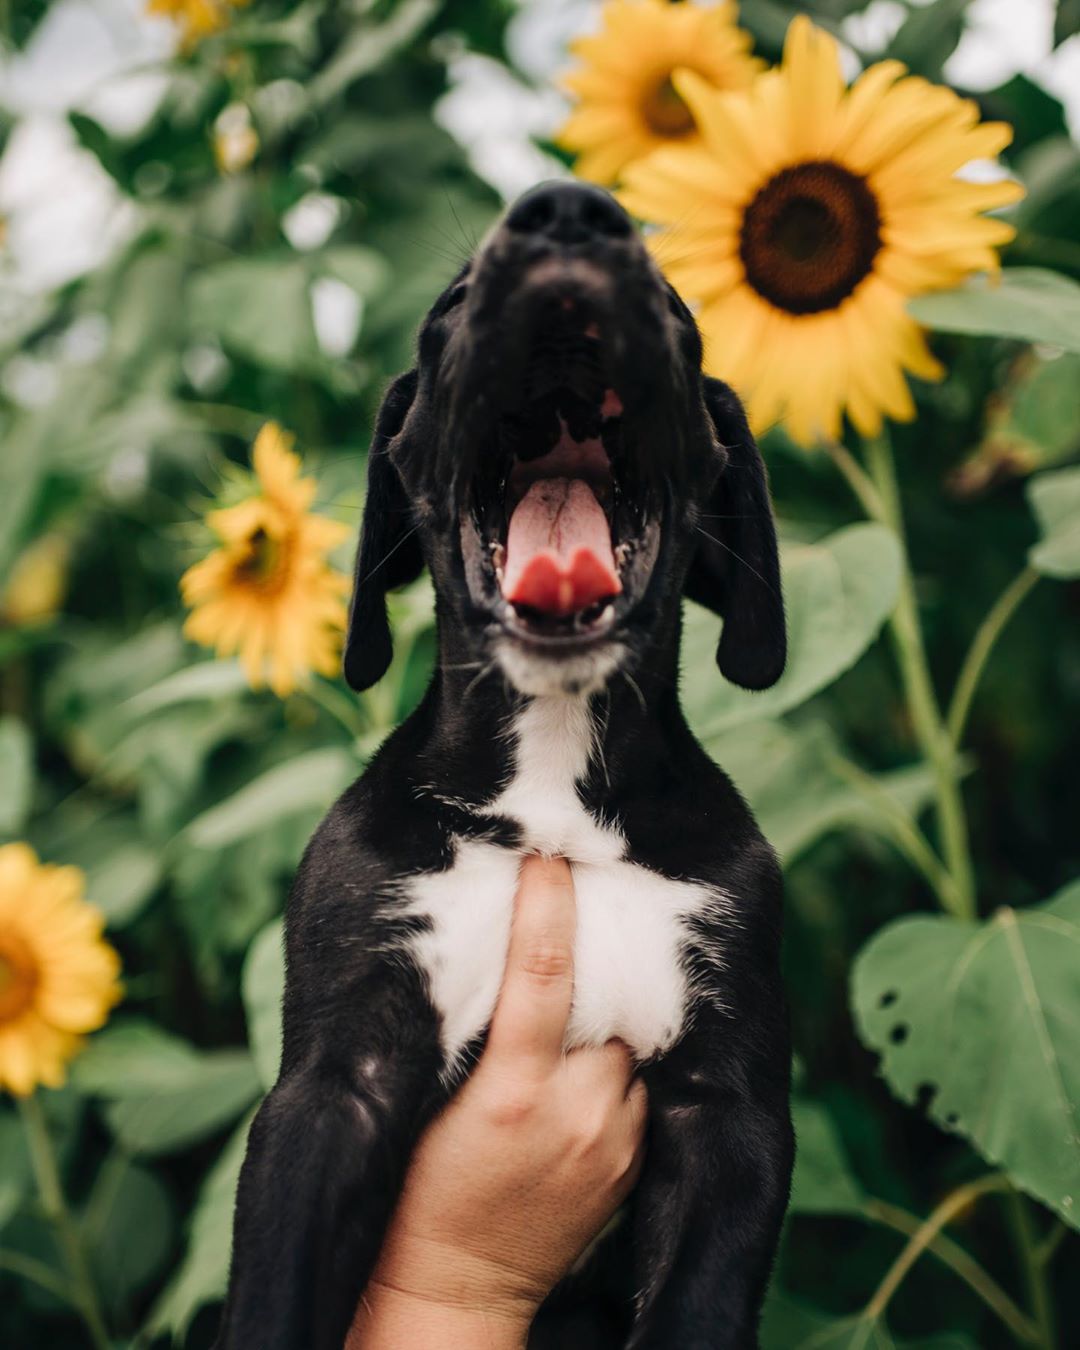 holding up a Great Dane puppy against the sunflowers